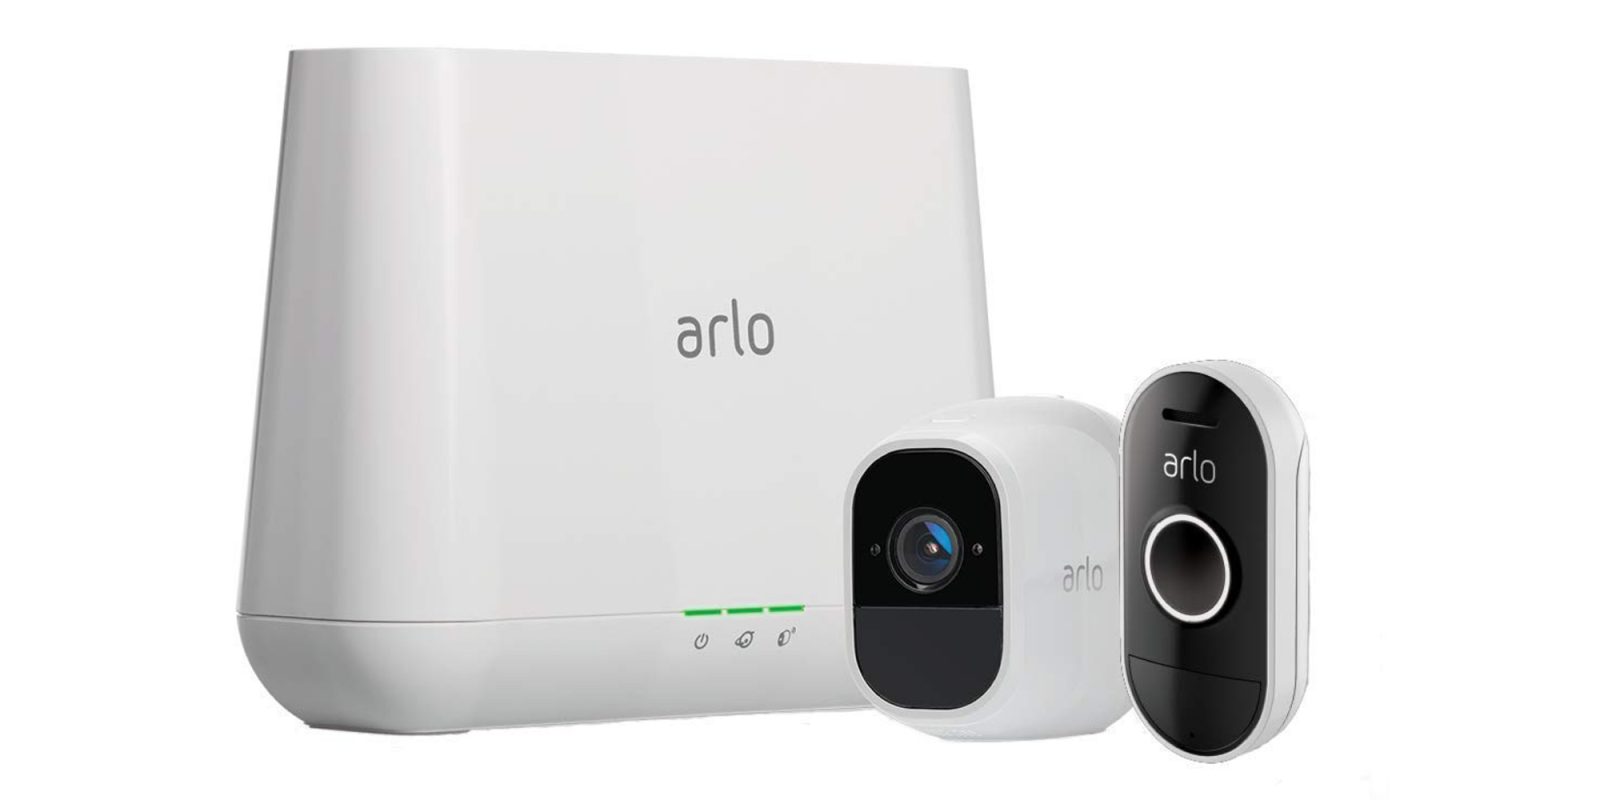 Save on security cameras + systems from $35 at Amazon: Arlo Pro 2